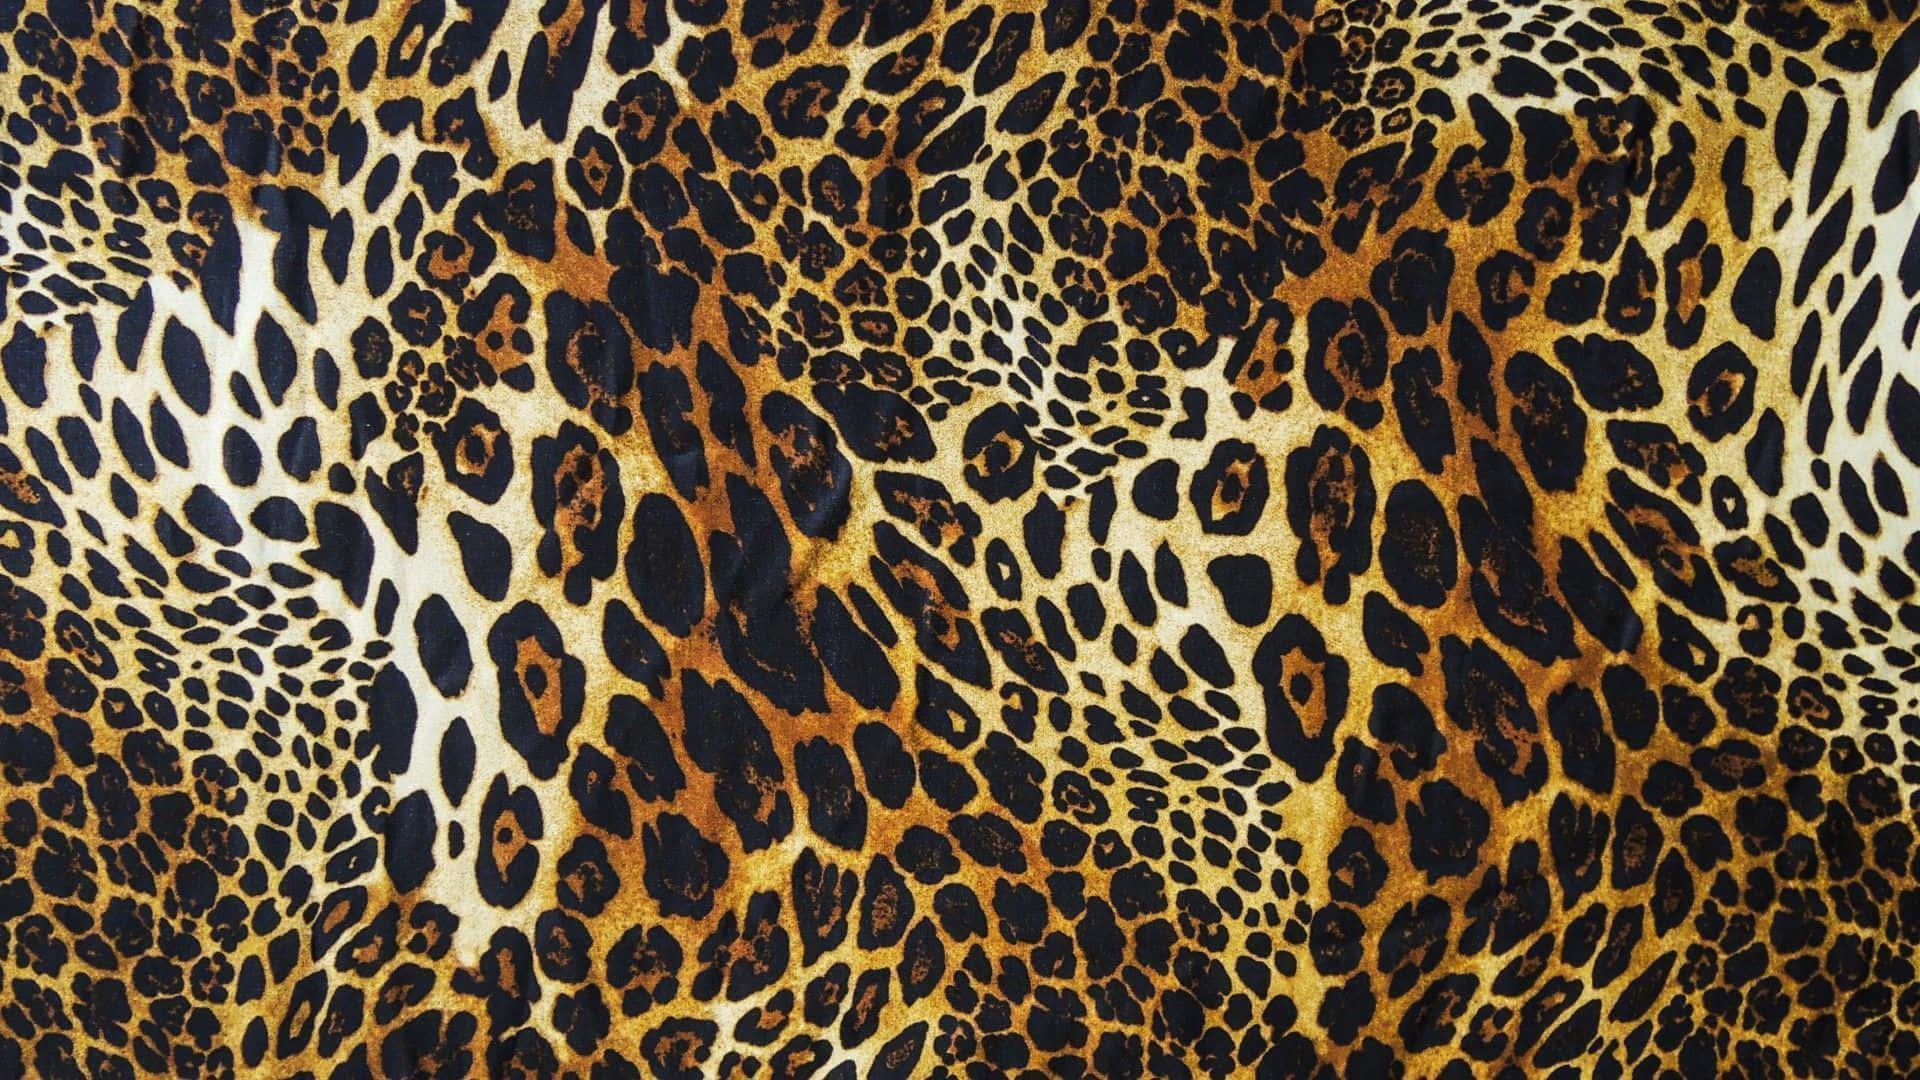 Download A Leopard Print Fabric With Black And Brown Spots Wallpaper ...